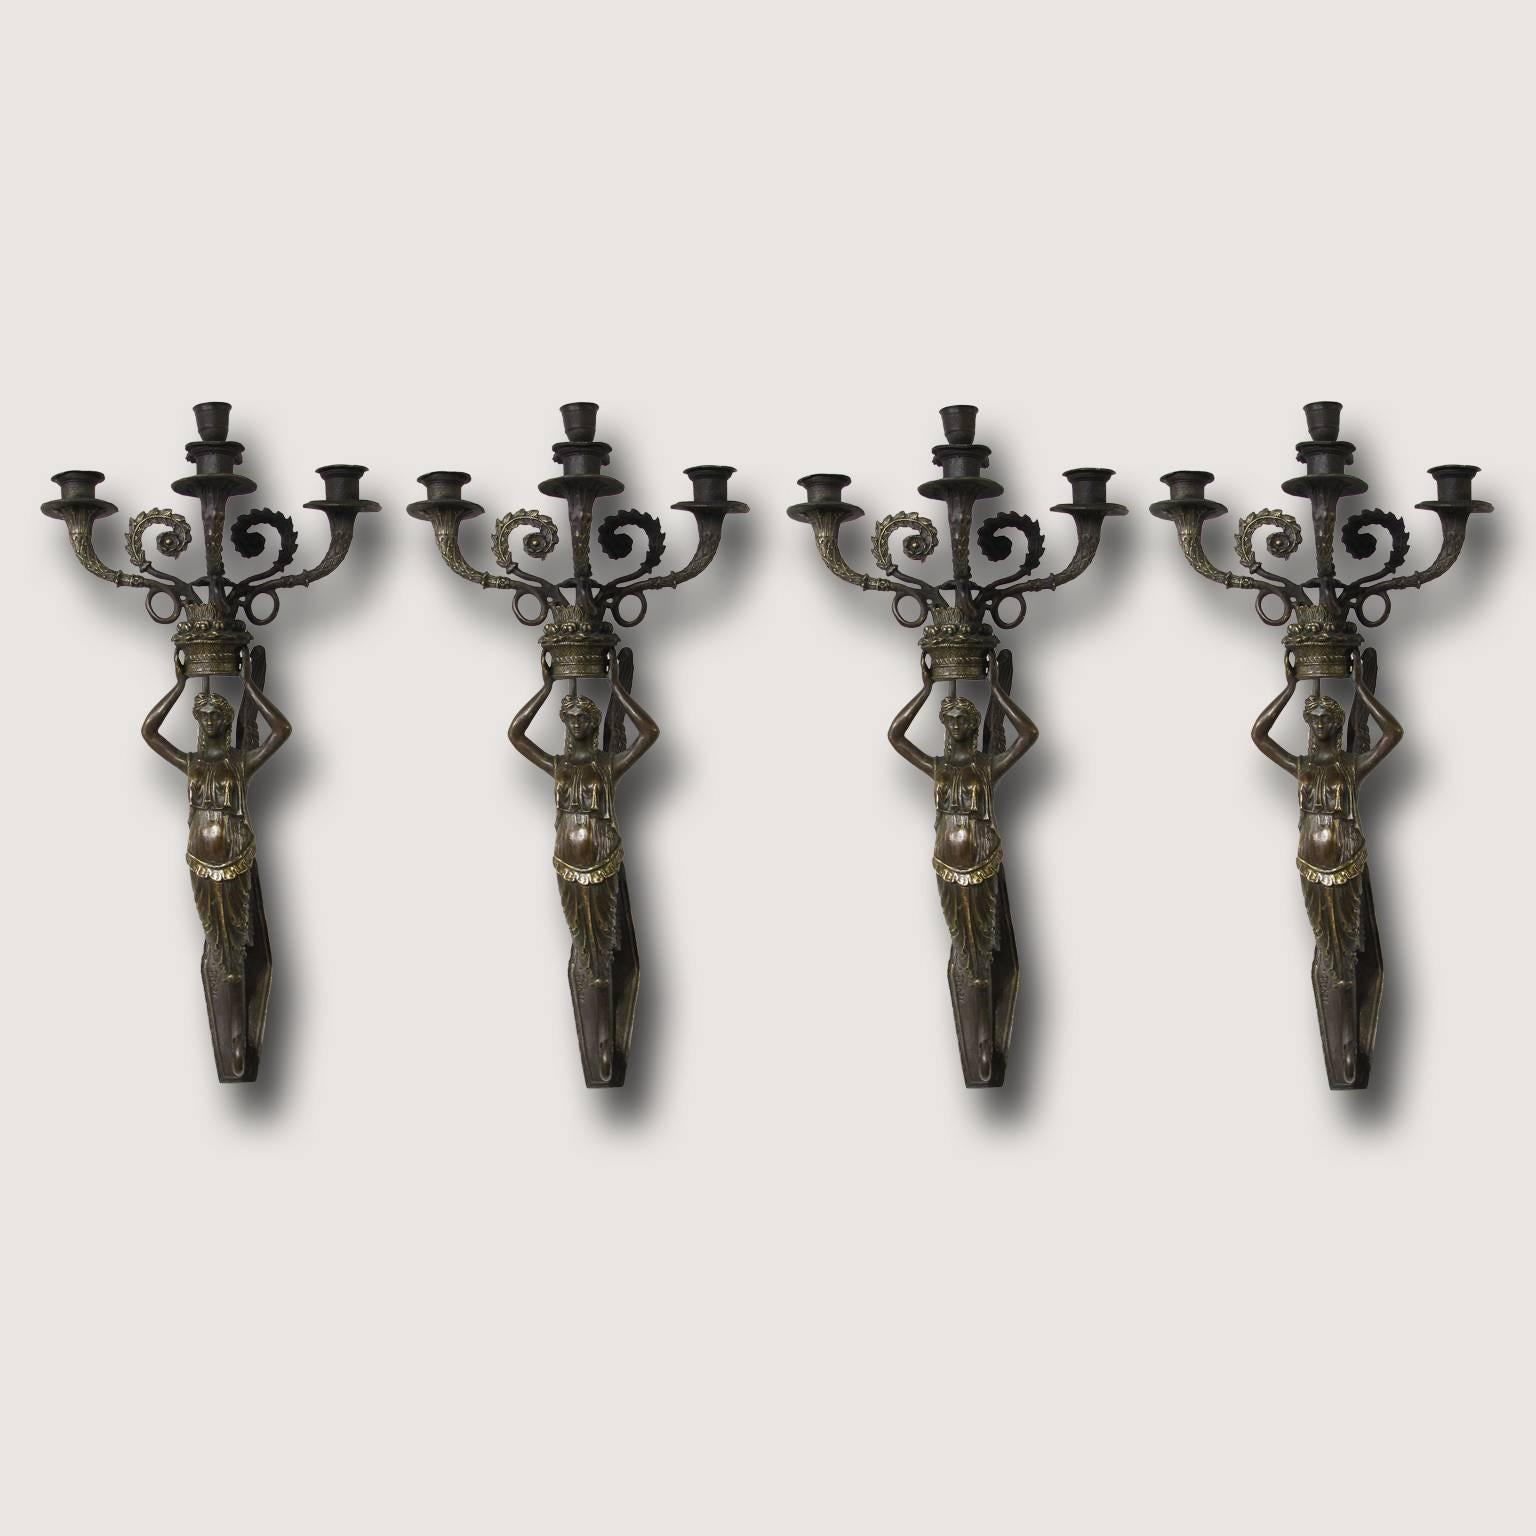 A beautiful set of four figural three-light patinated bronze sconces.
A winged female figure is holding the three candle arms above her head.
Signed on the back plate ‘Fisher’. 
English manufactory from the late 19th century.
 